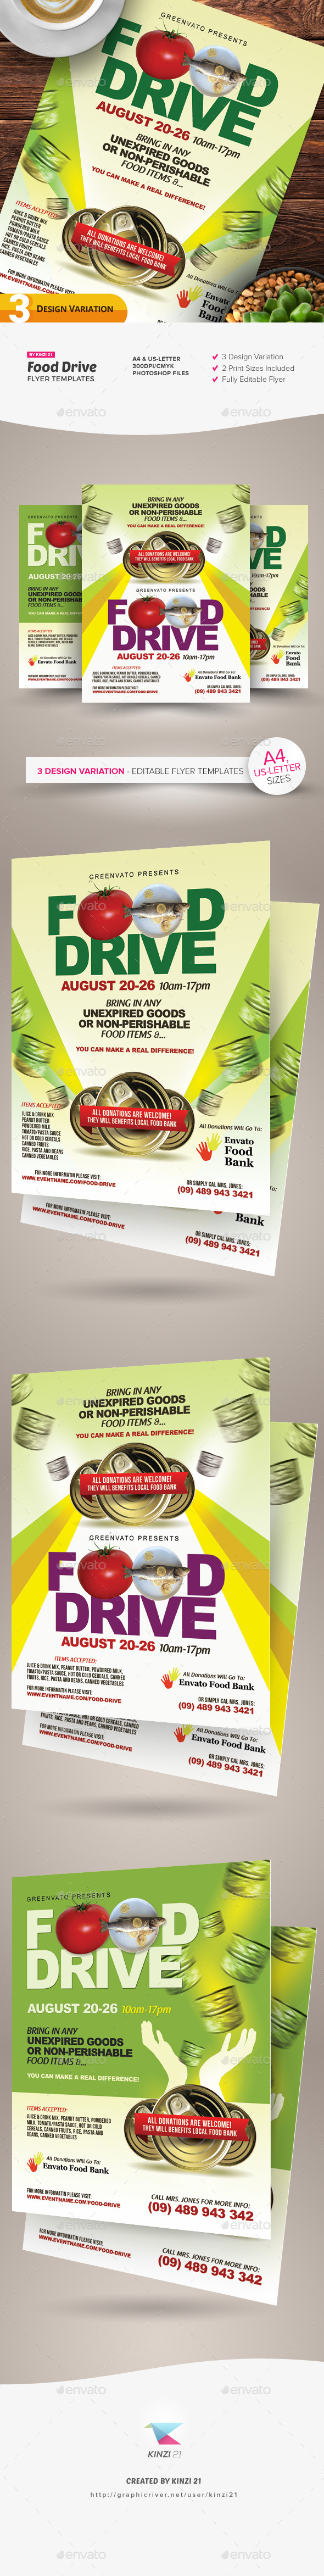 Food Drive Flyer Templates Within Food Drive Flyer Template